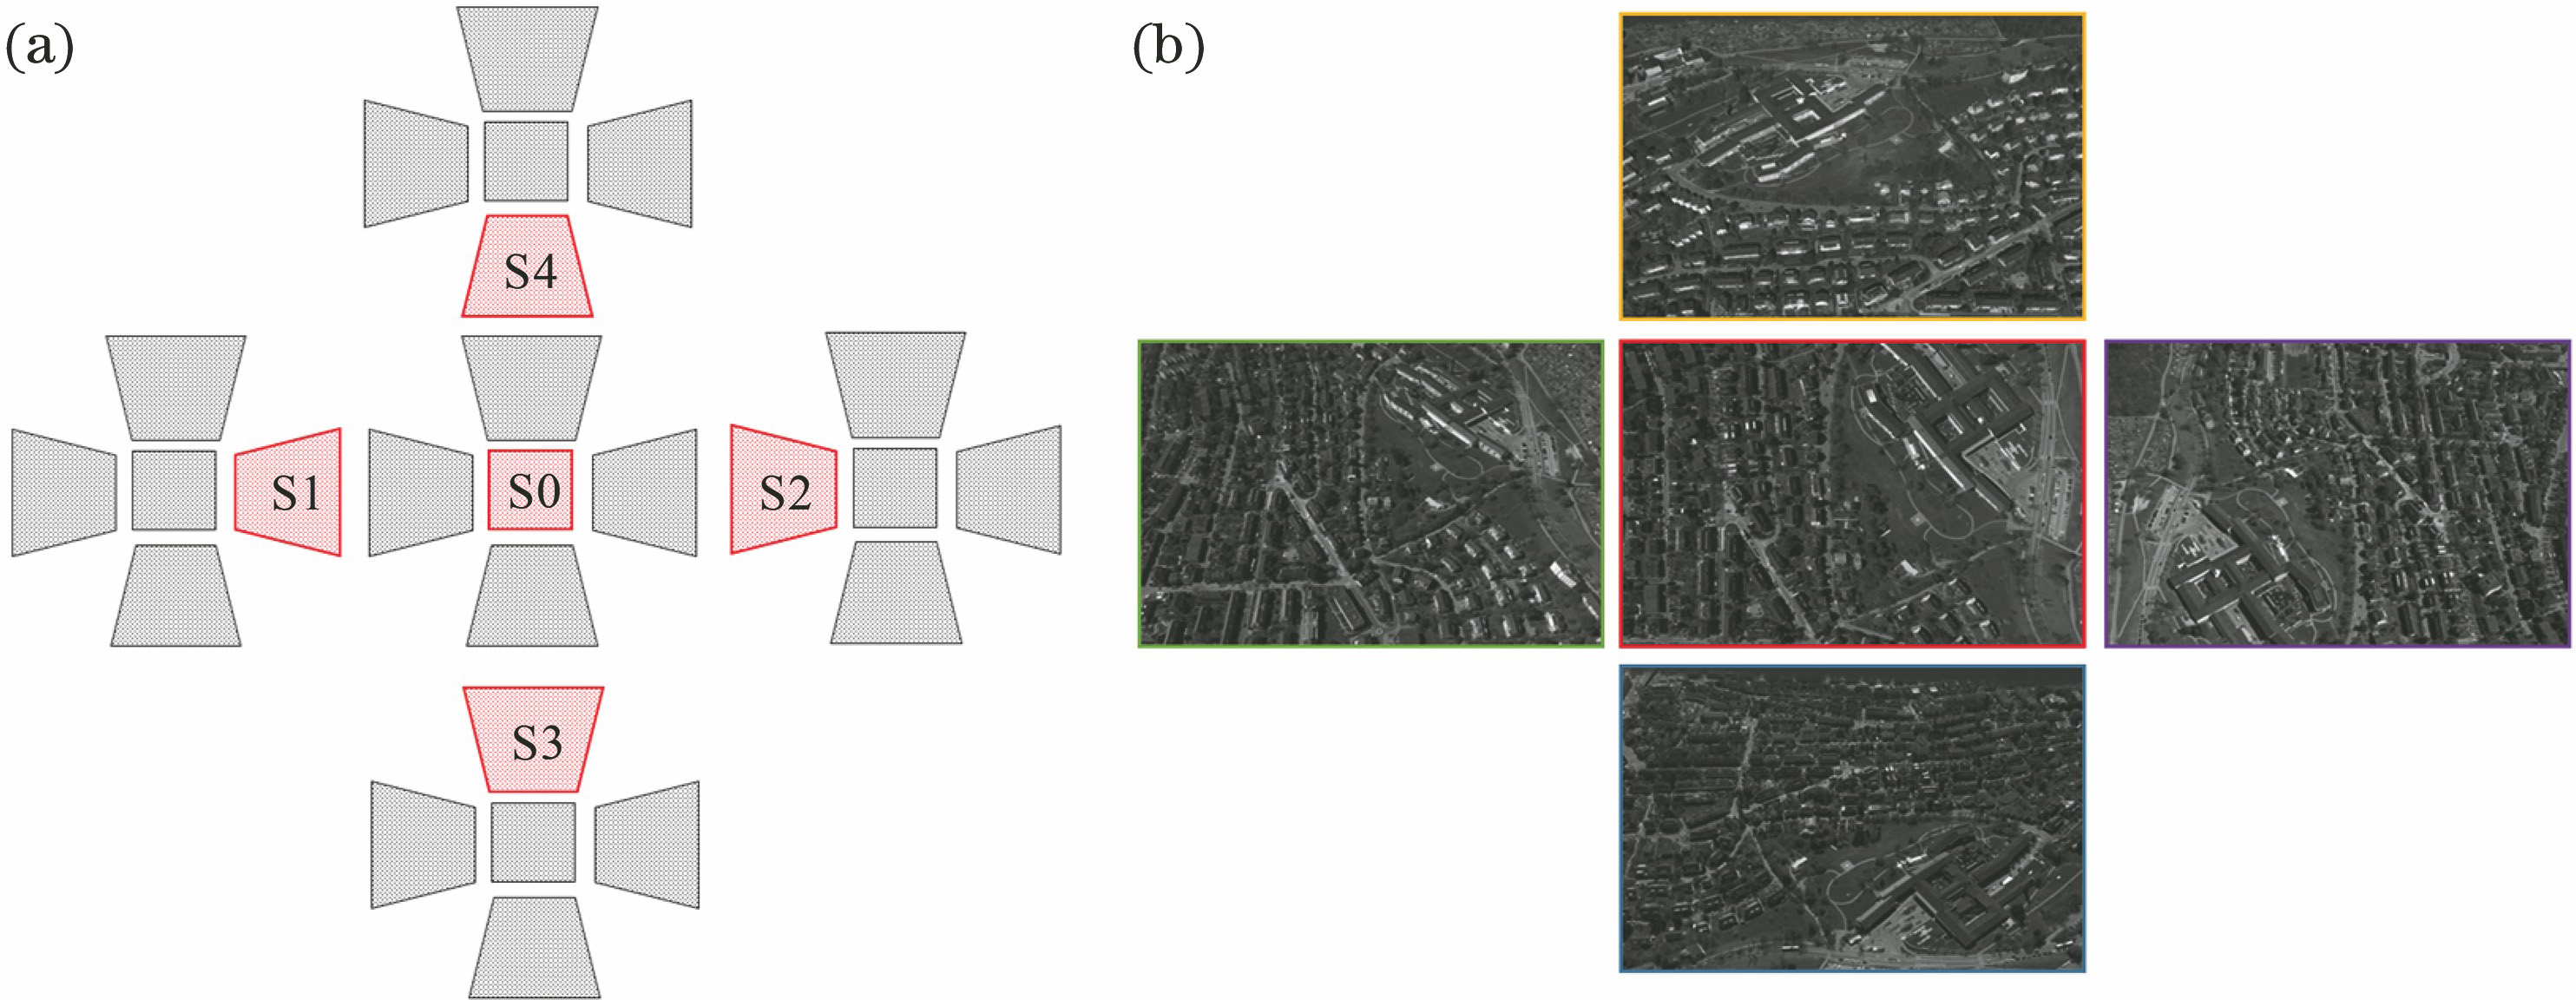 Working principle of five camera oblique photography device. (a) Five images captured in 3D object space; (b) plane-directional distribution of five images captured on an exposure station